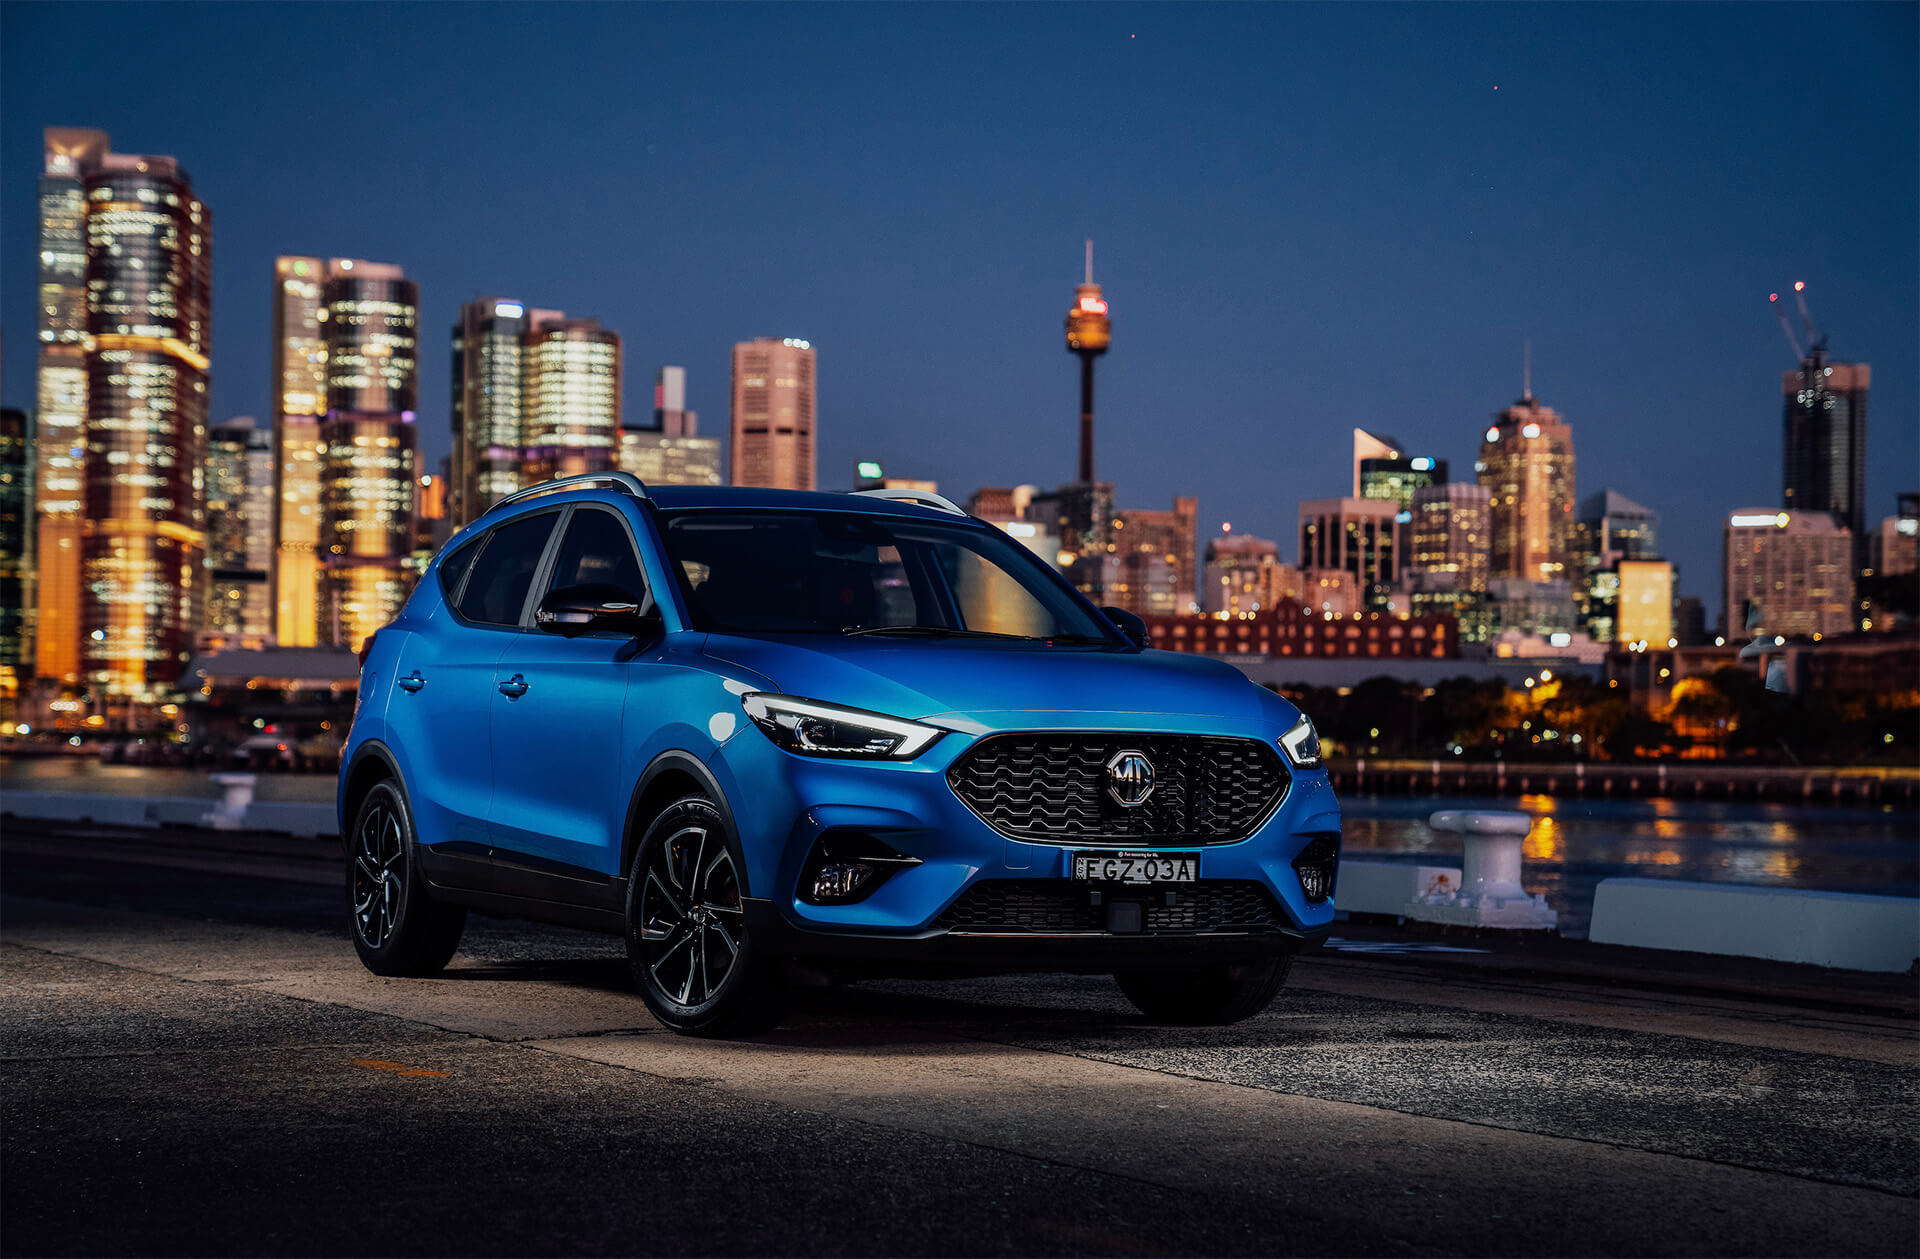 MG ZST launches in Australia. The new compact SUV in town